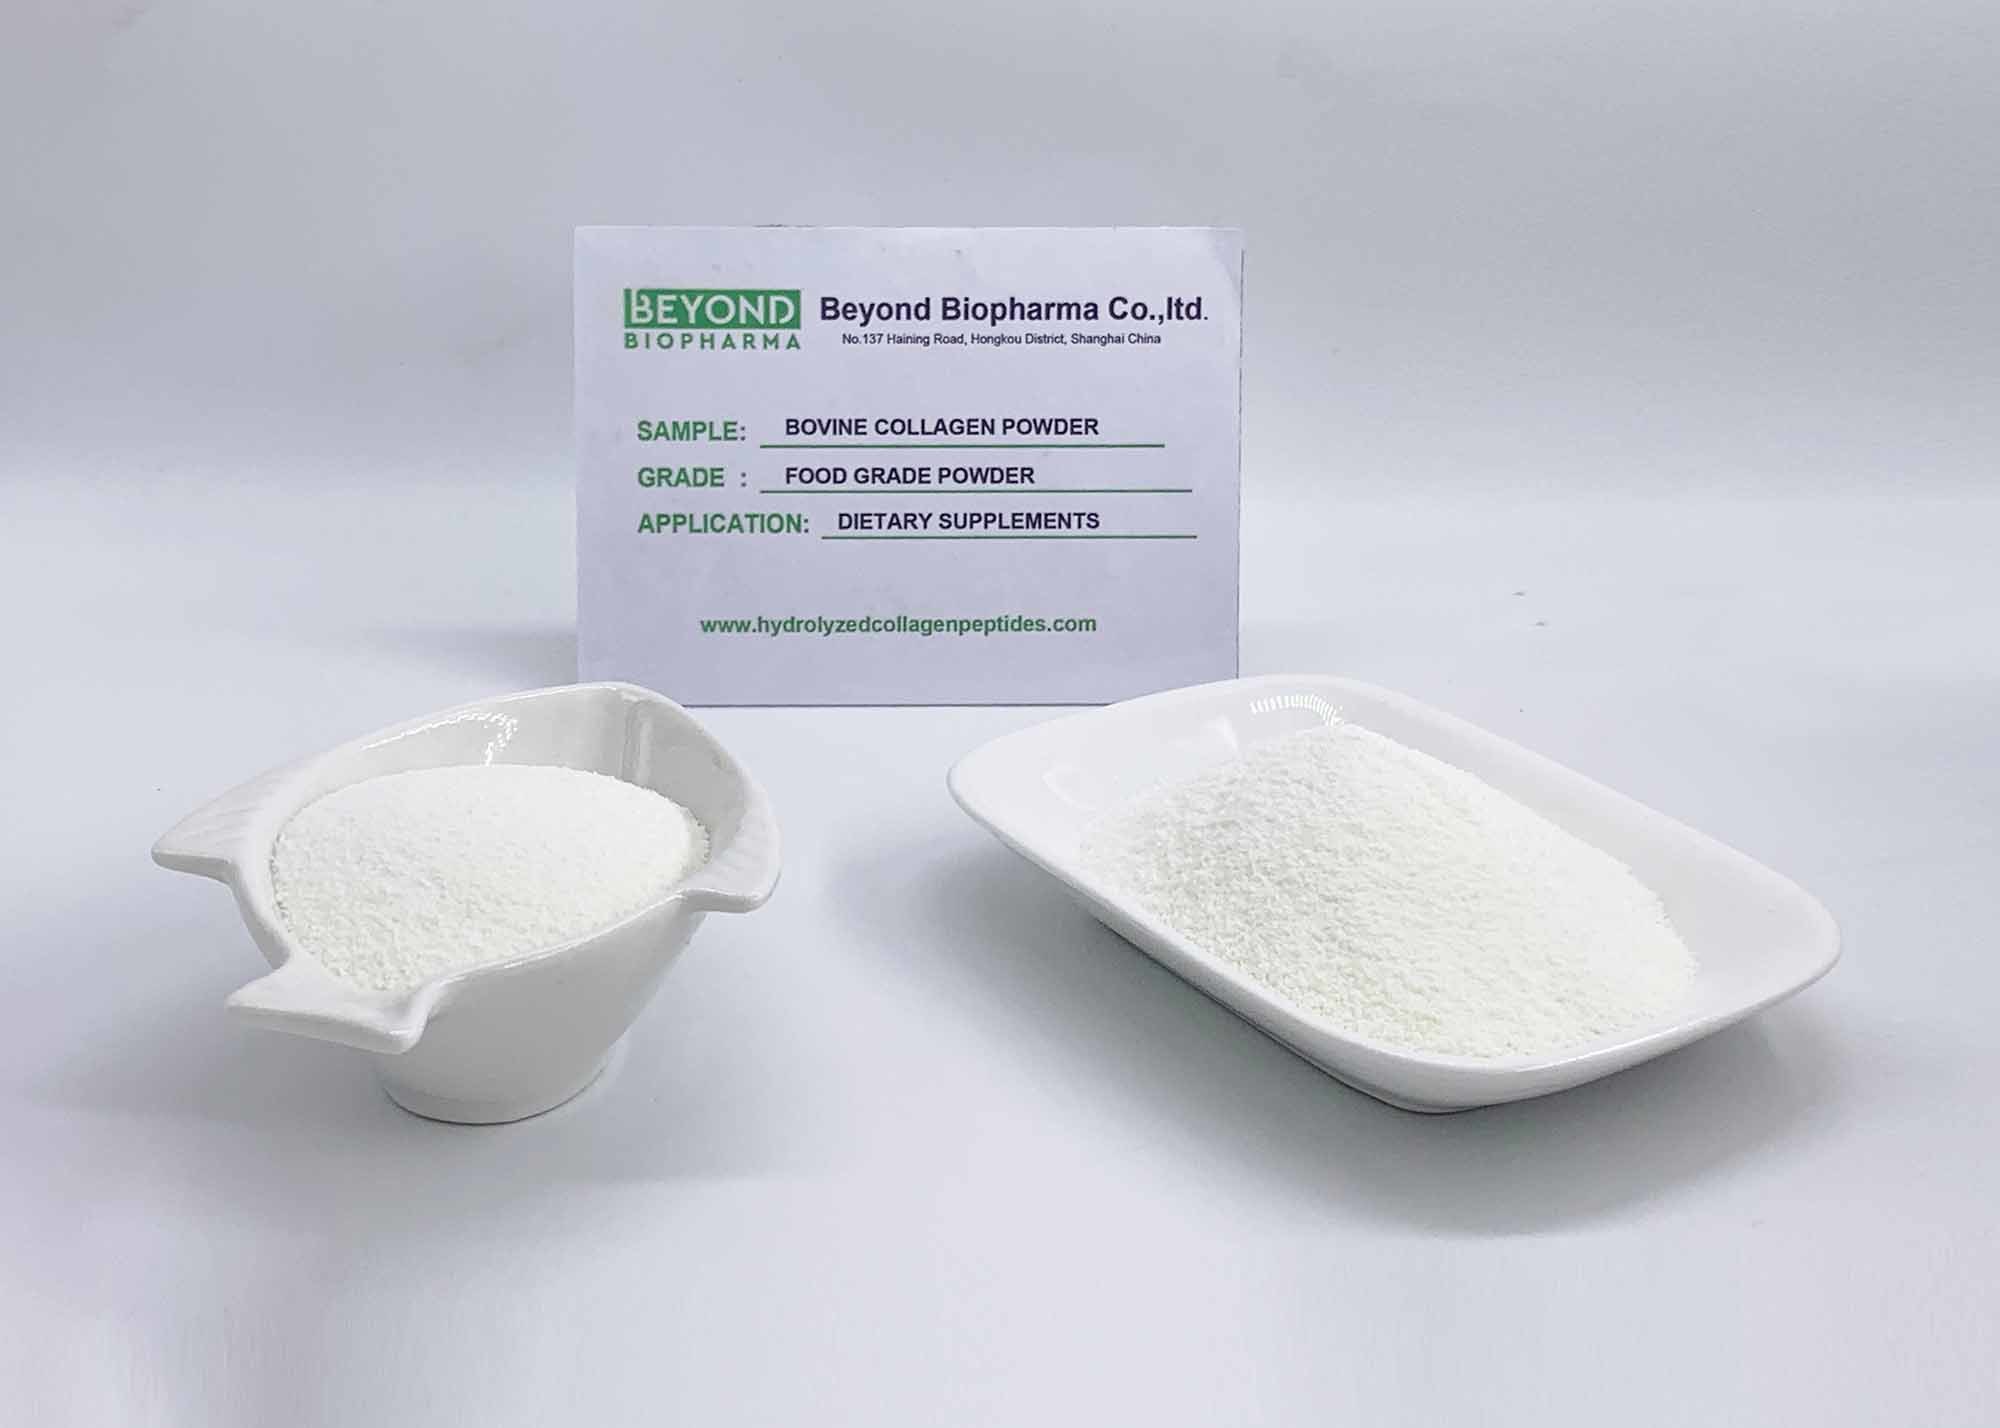 Hydrolyzed Collagen Peptides and Powder from Bovine Hides